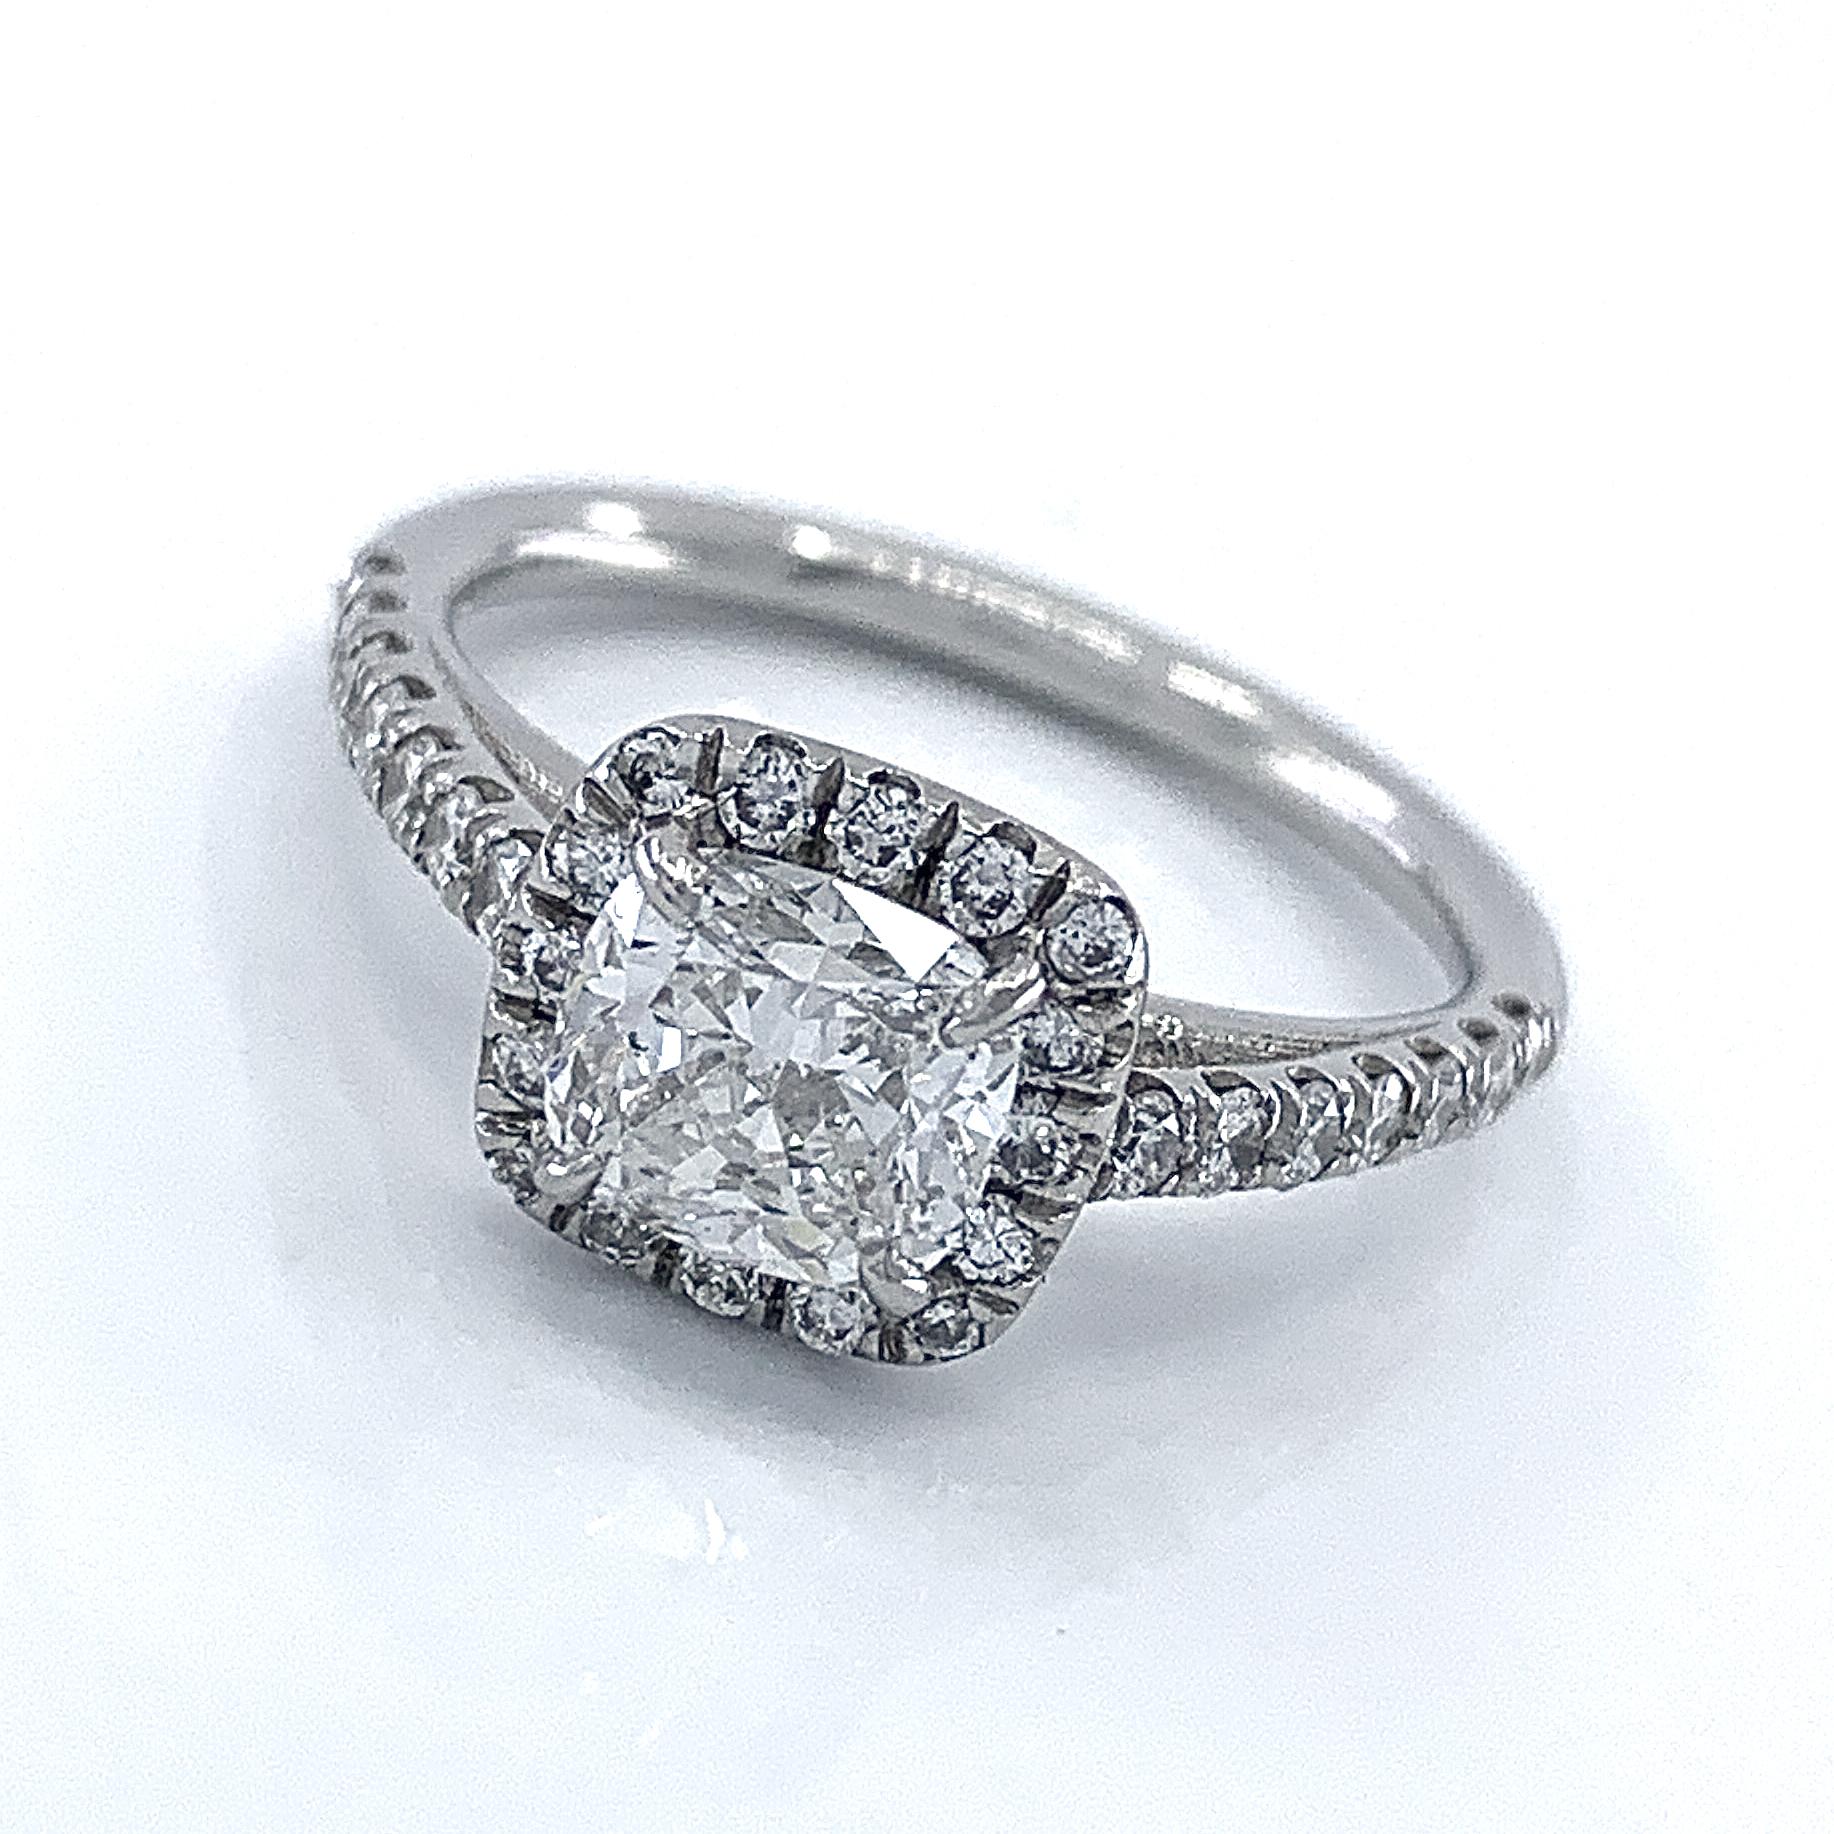 Certified D Colorless 1.01 Carat Diamond Cushion in Platinum Engagement Ring In New Condition For Sale In Sherman Oaks, CA